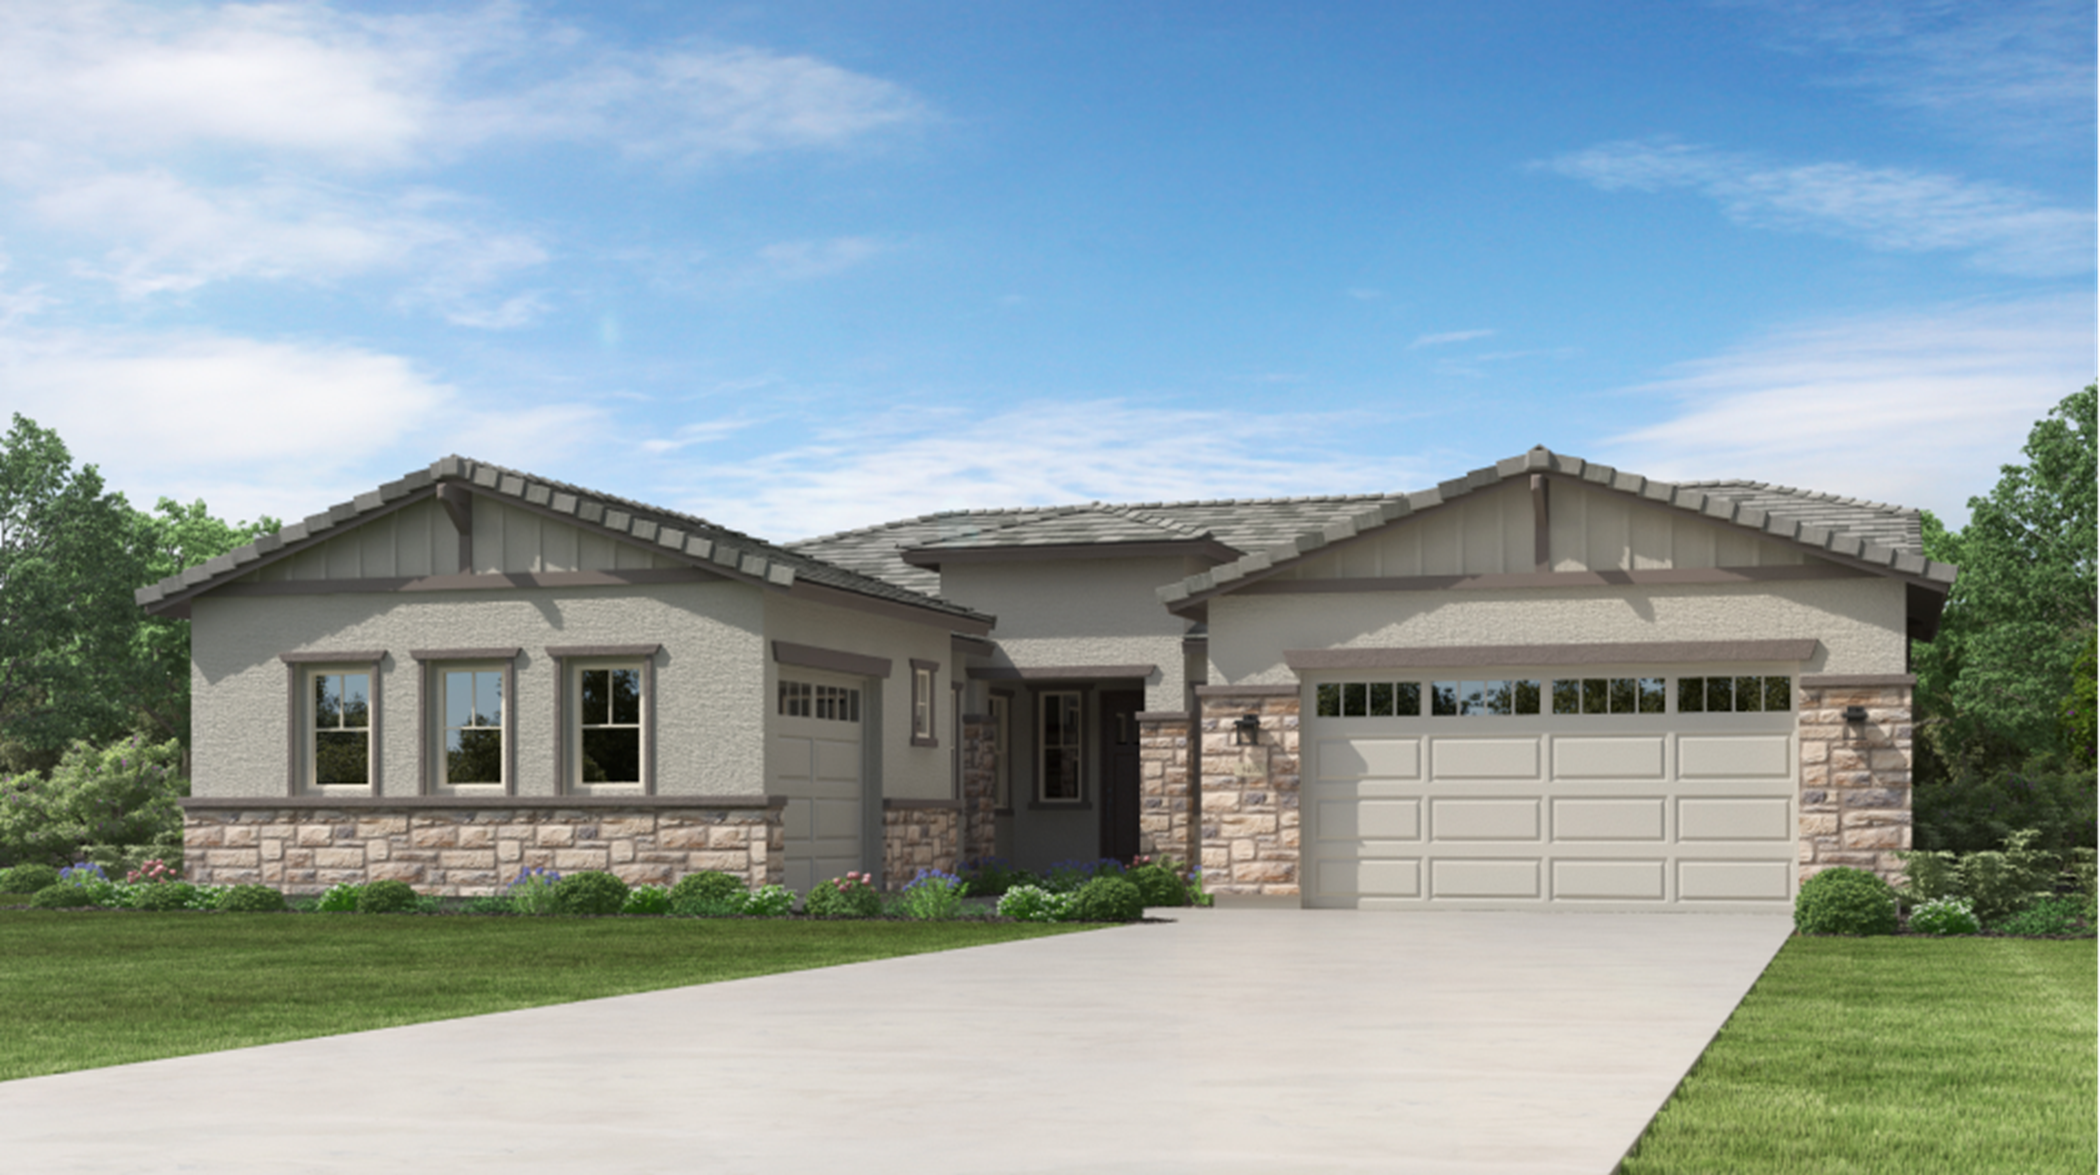 Craftsman-style home image